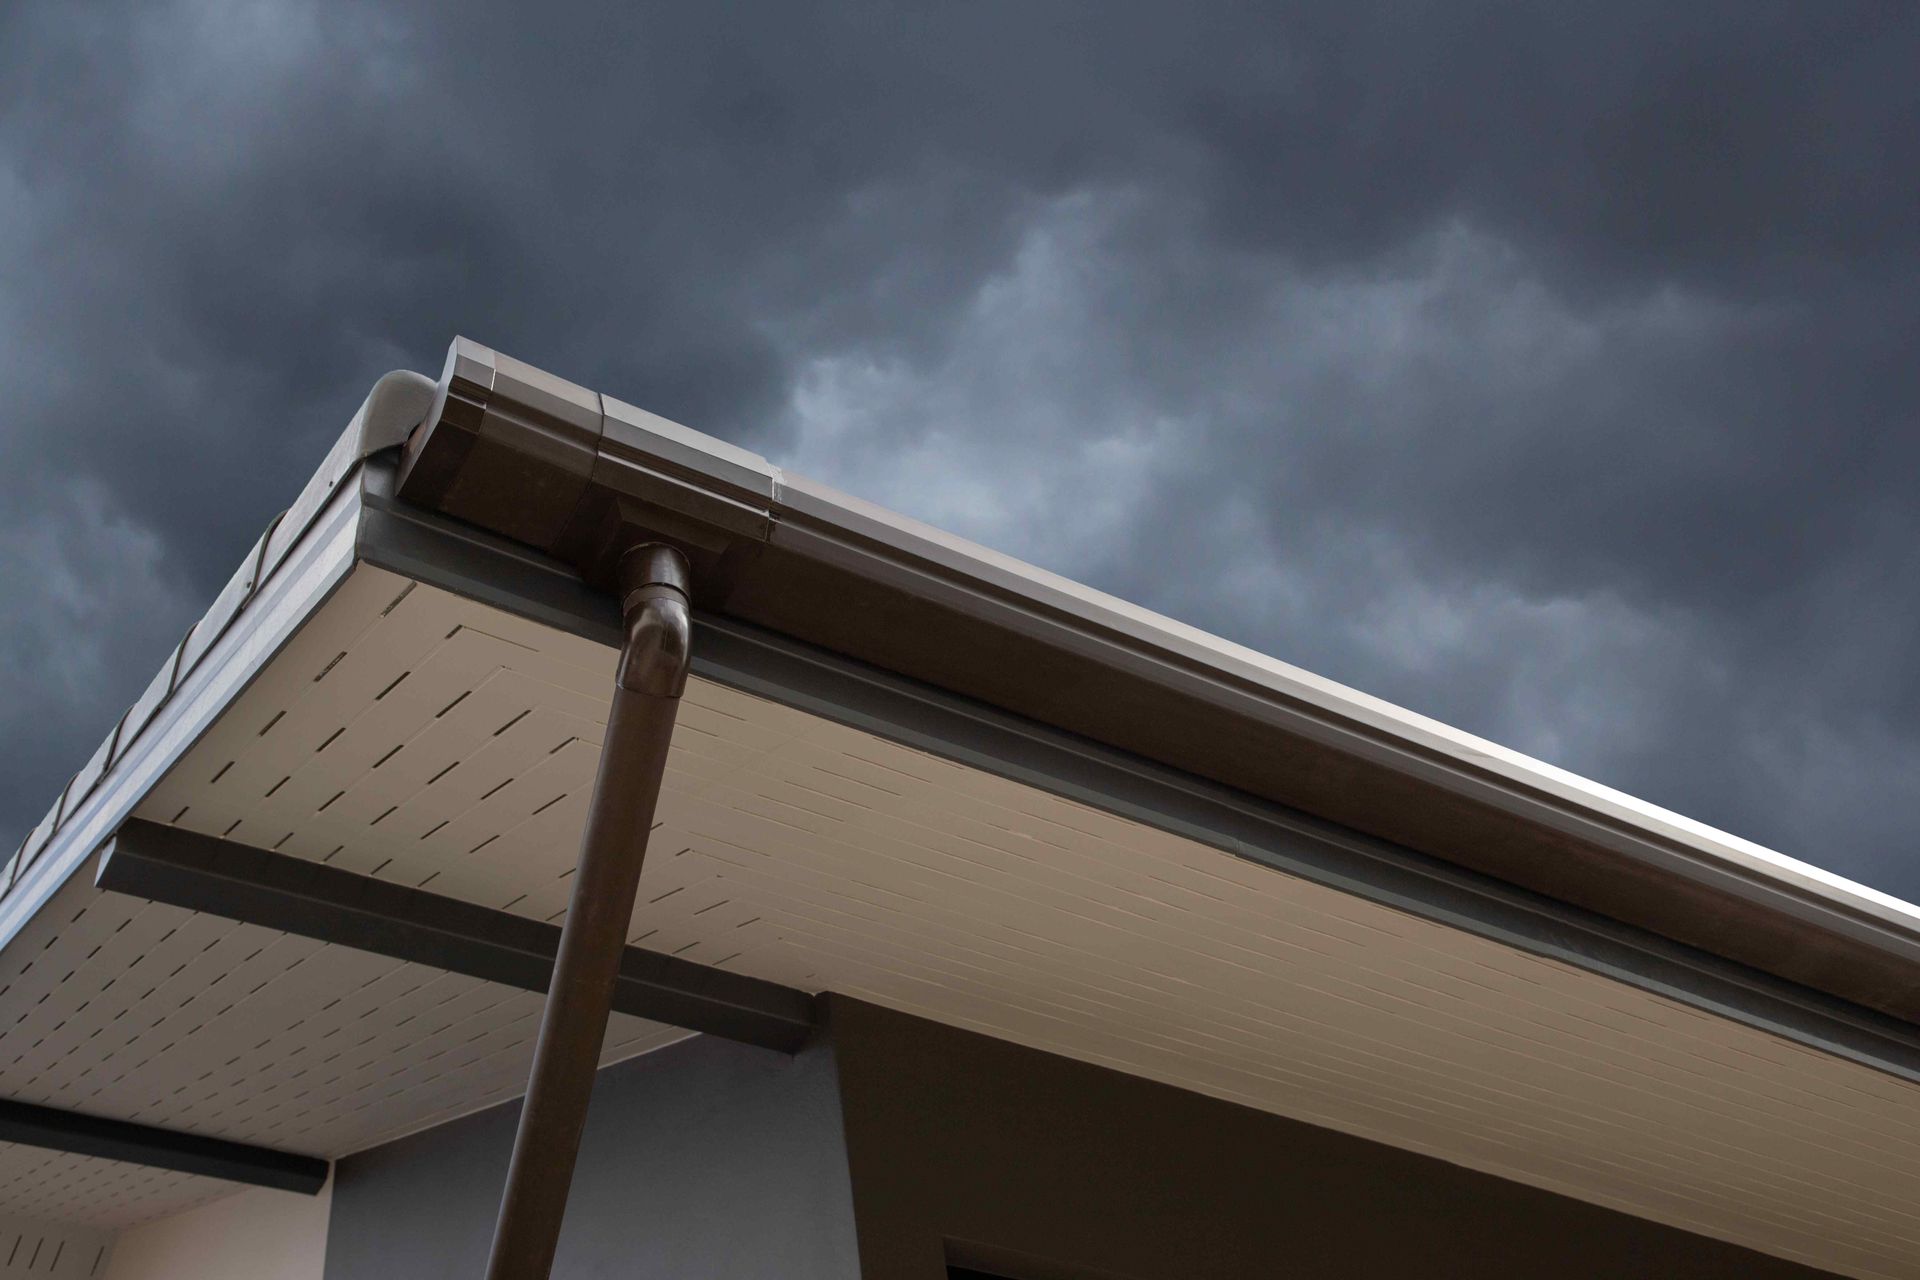 Stormy clouds loom threateningly over a home in the Midwest.